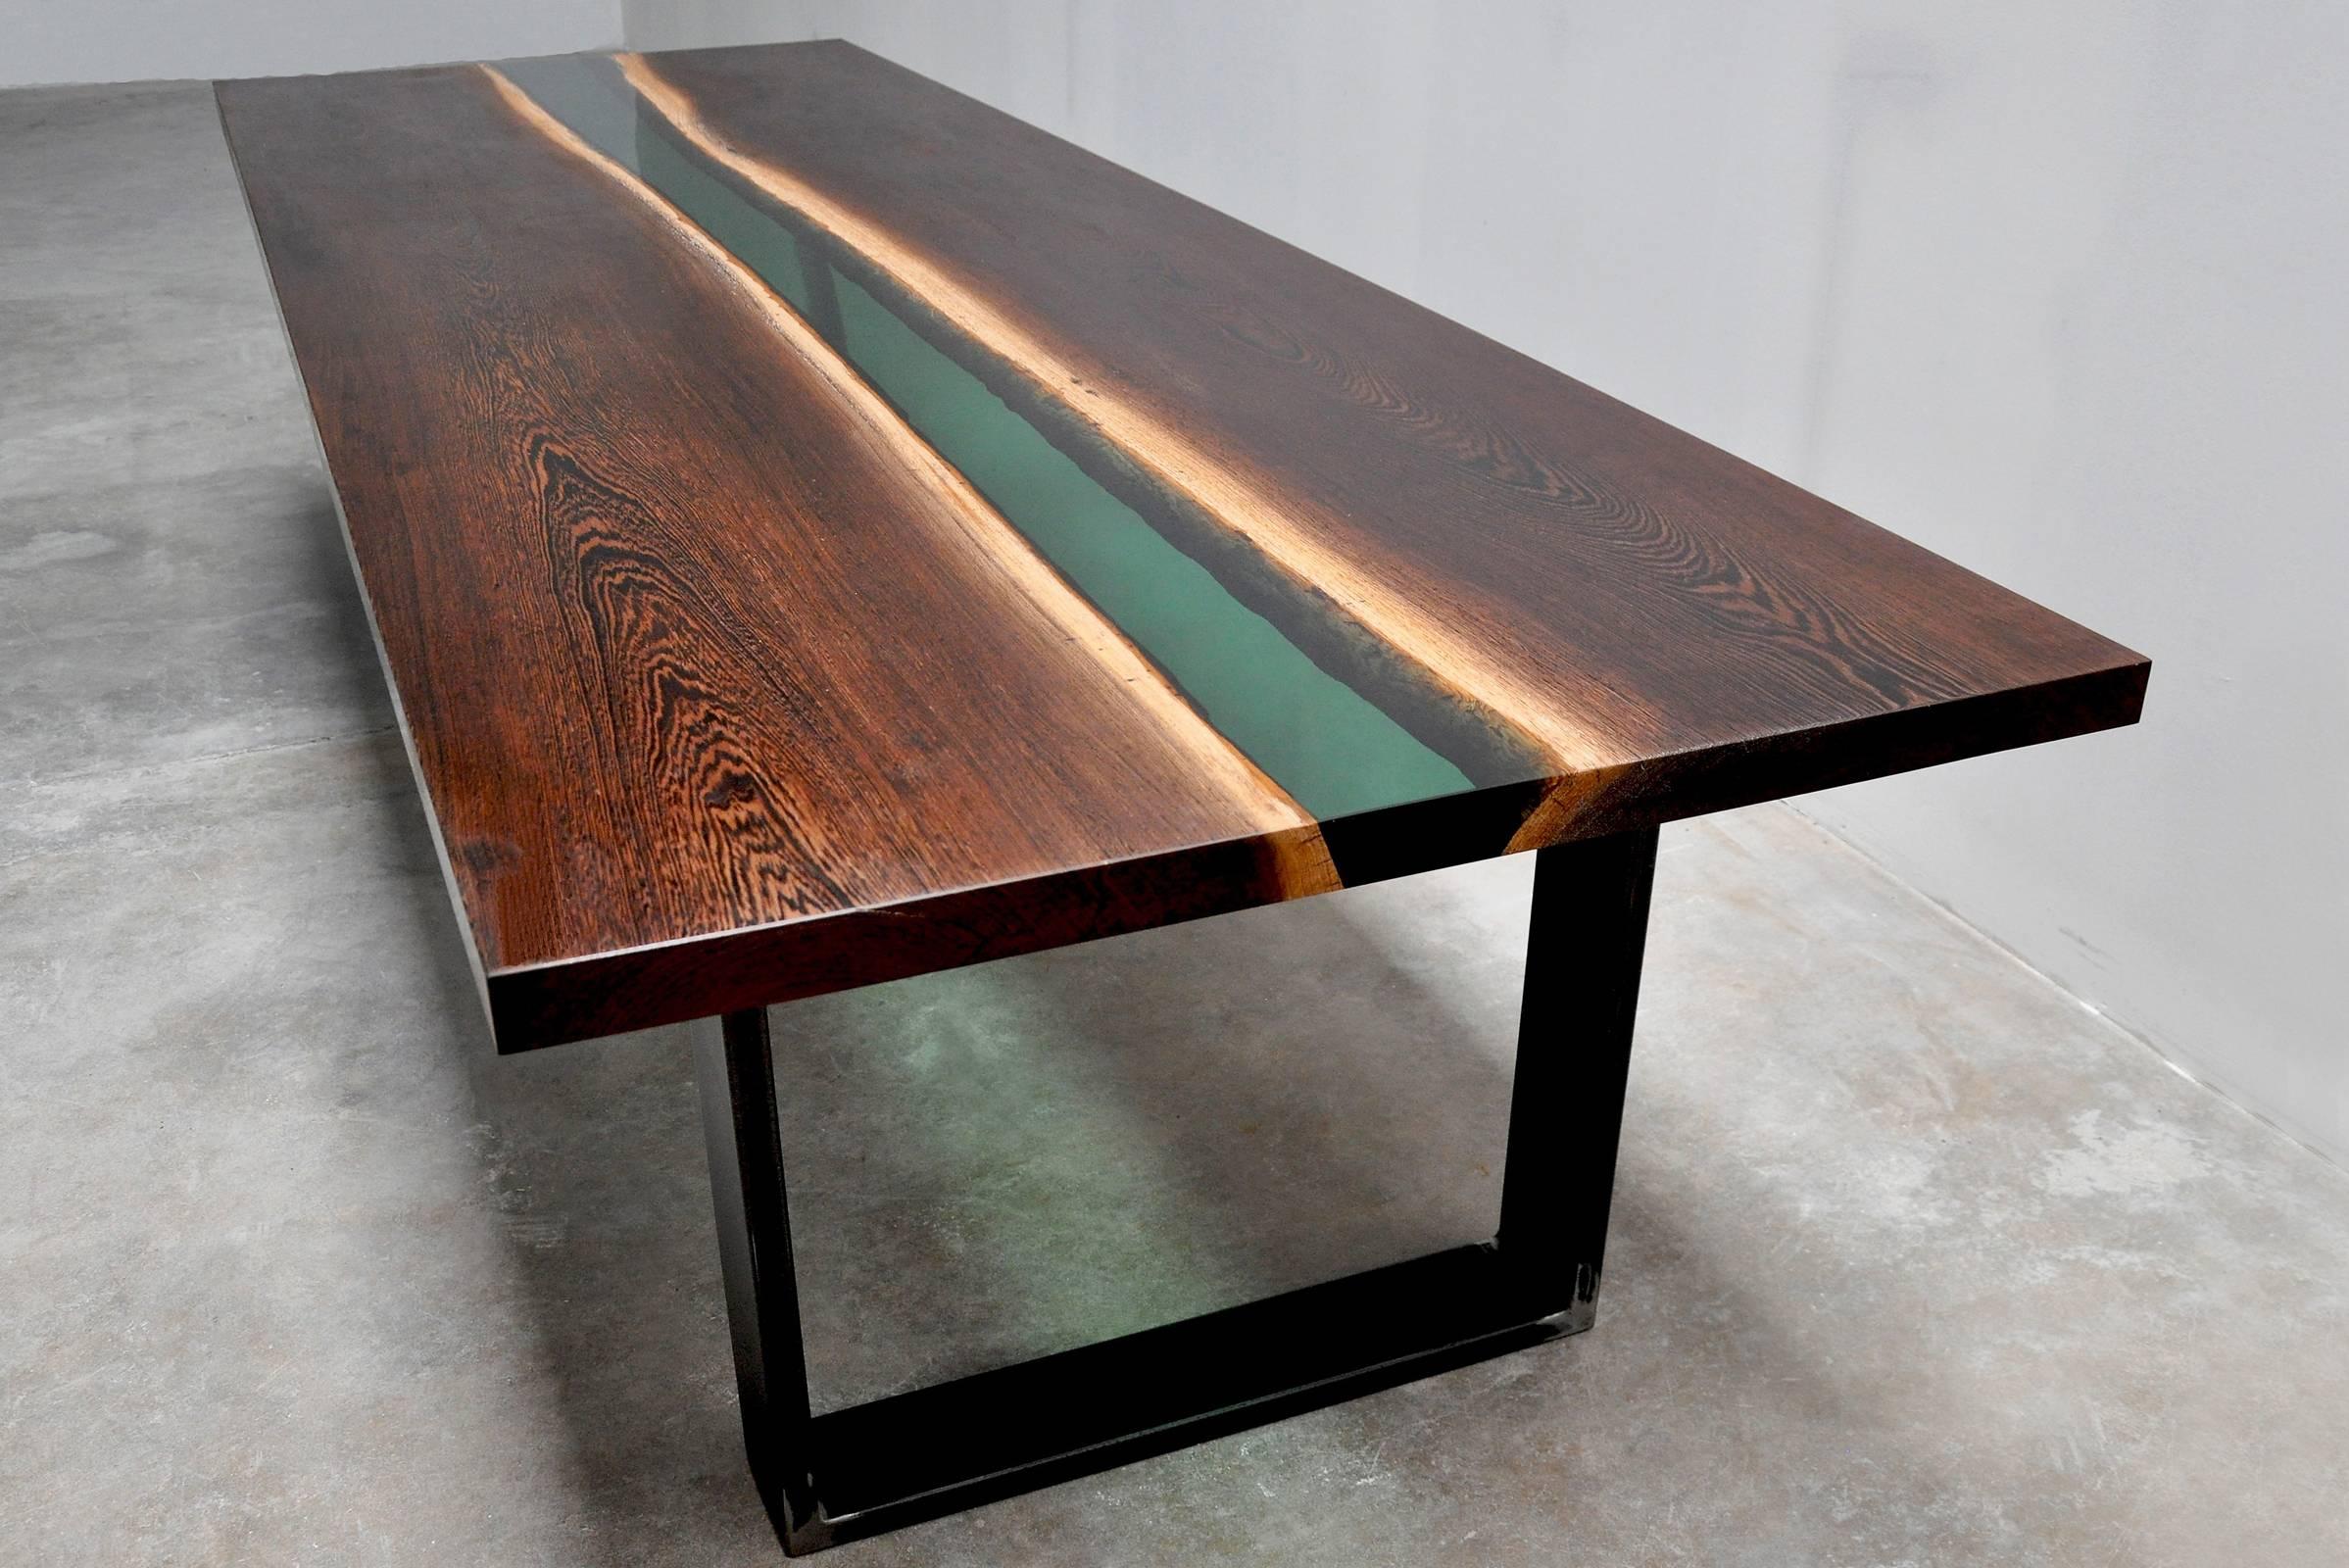 Dinning table or conference table in Wenge wood from 
equatorial and tropical africa. Two Wenge wood slats joined 
by a green transparent resin emerald color liked. A very 
strong wood very difficult to work with which give marvellous 
knots of